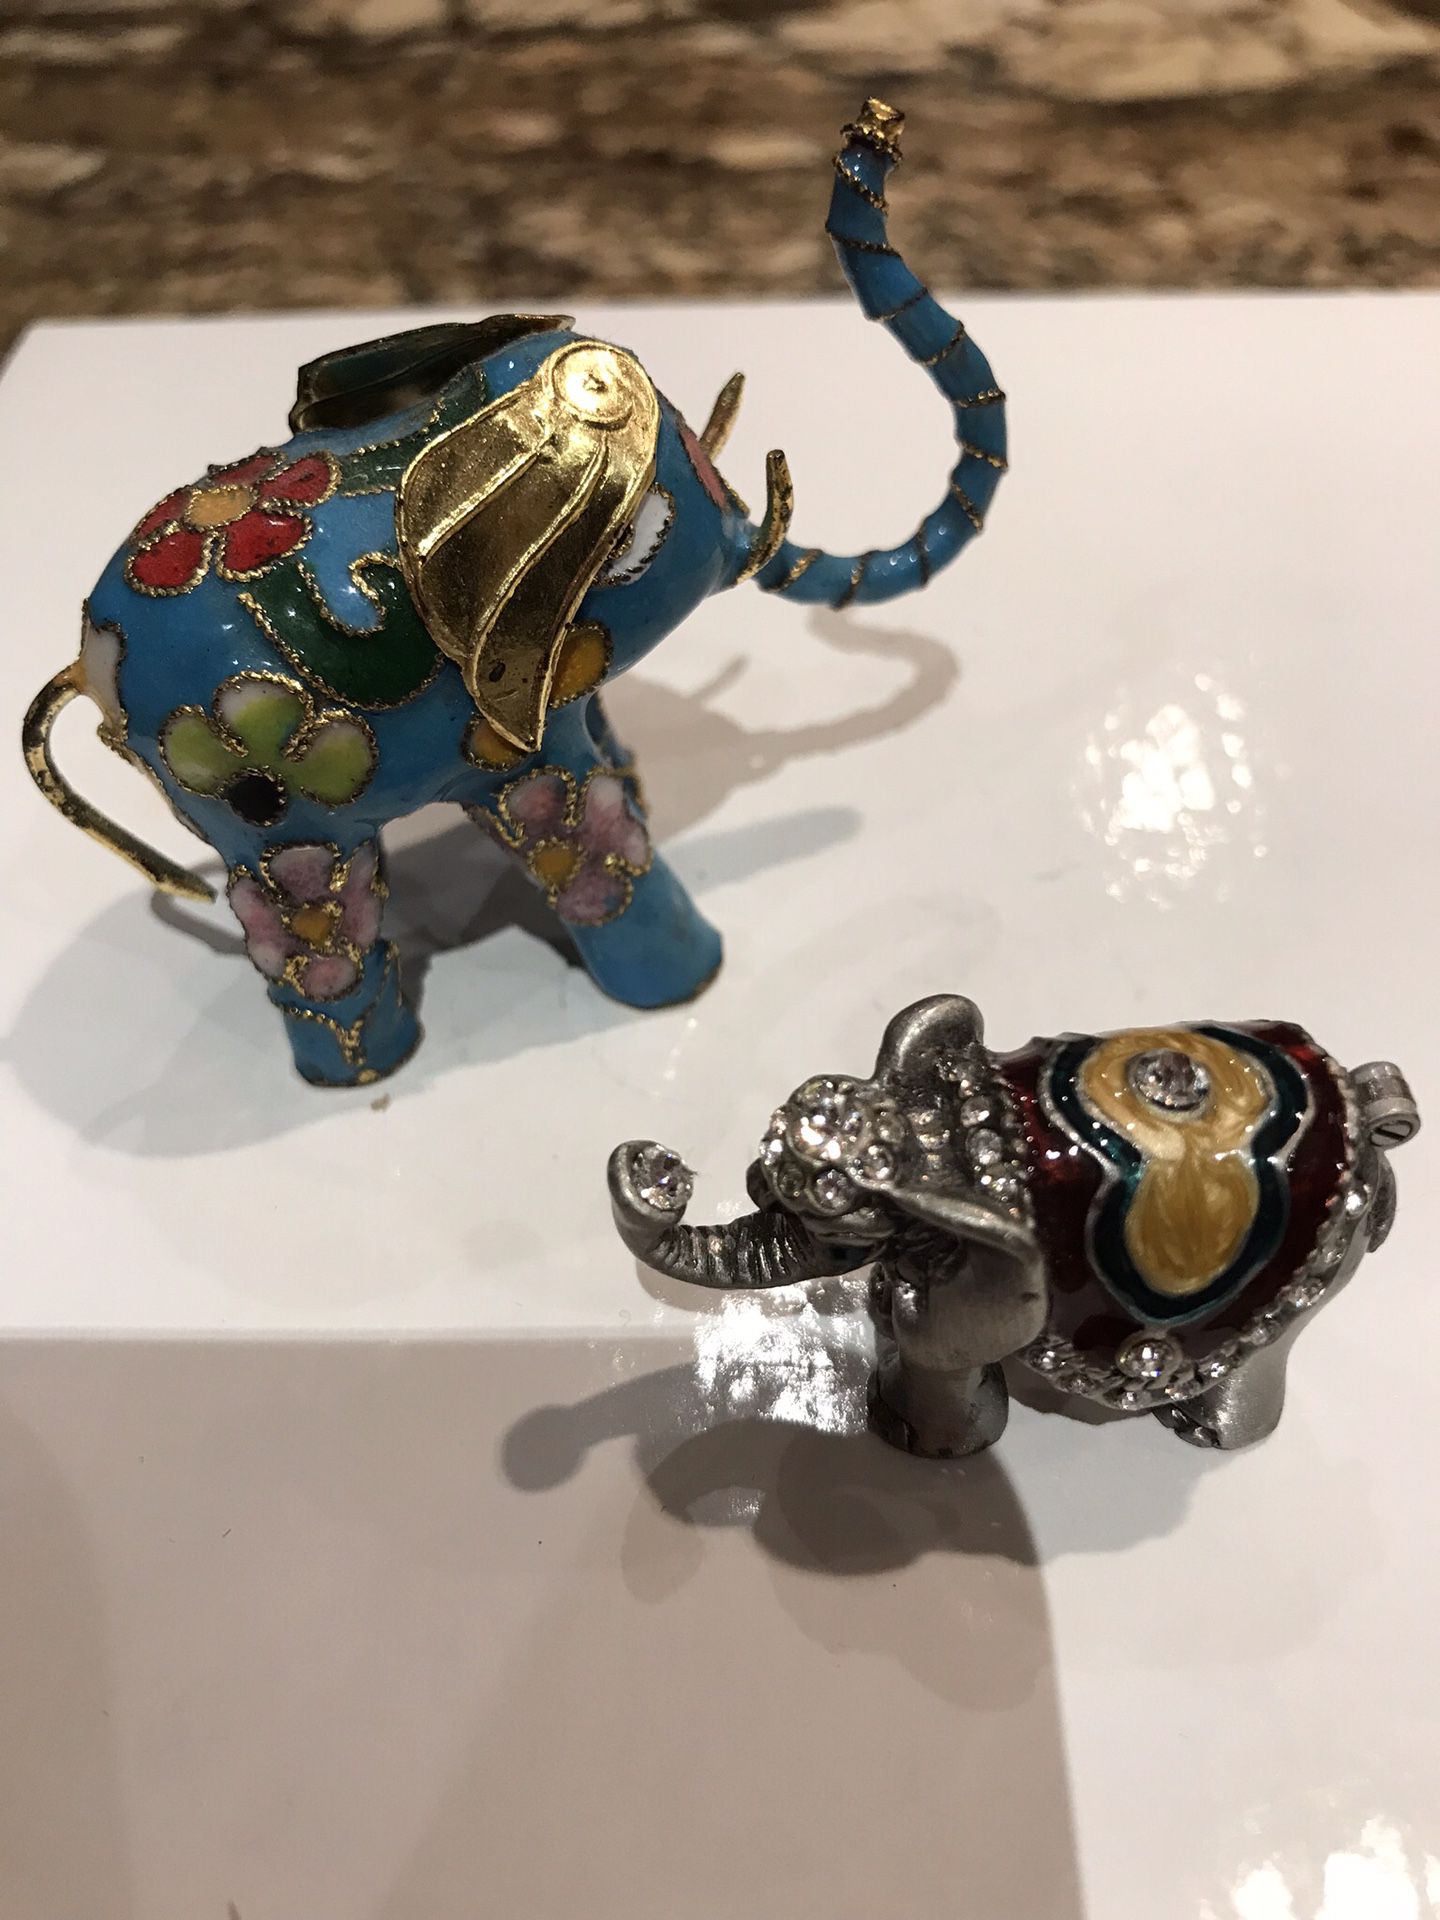 Two small elephants statues